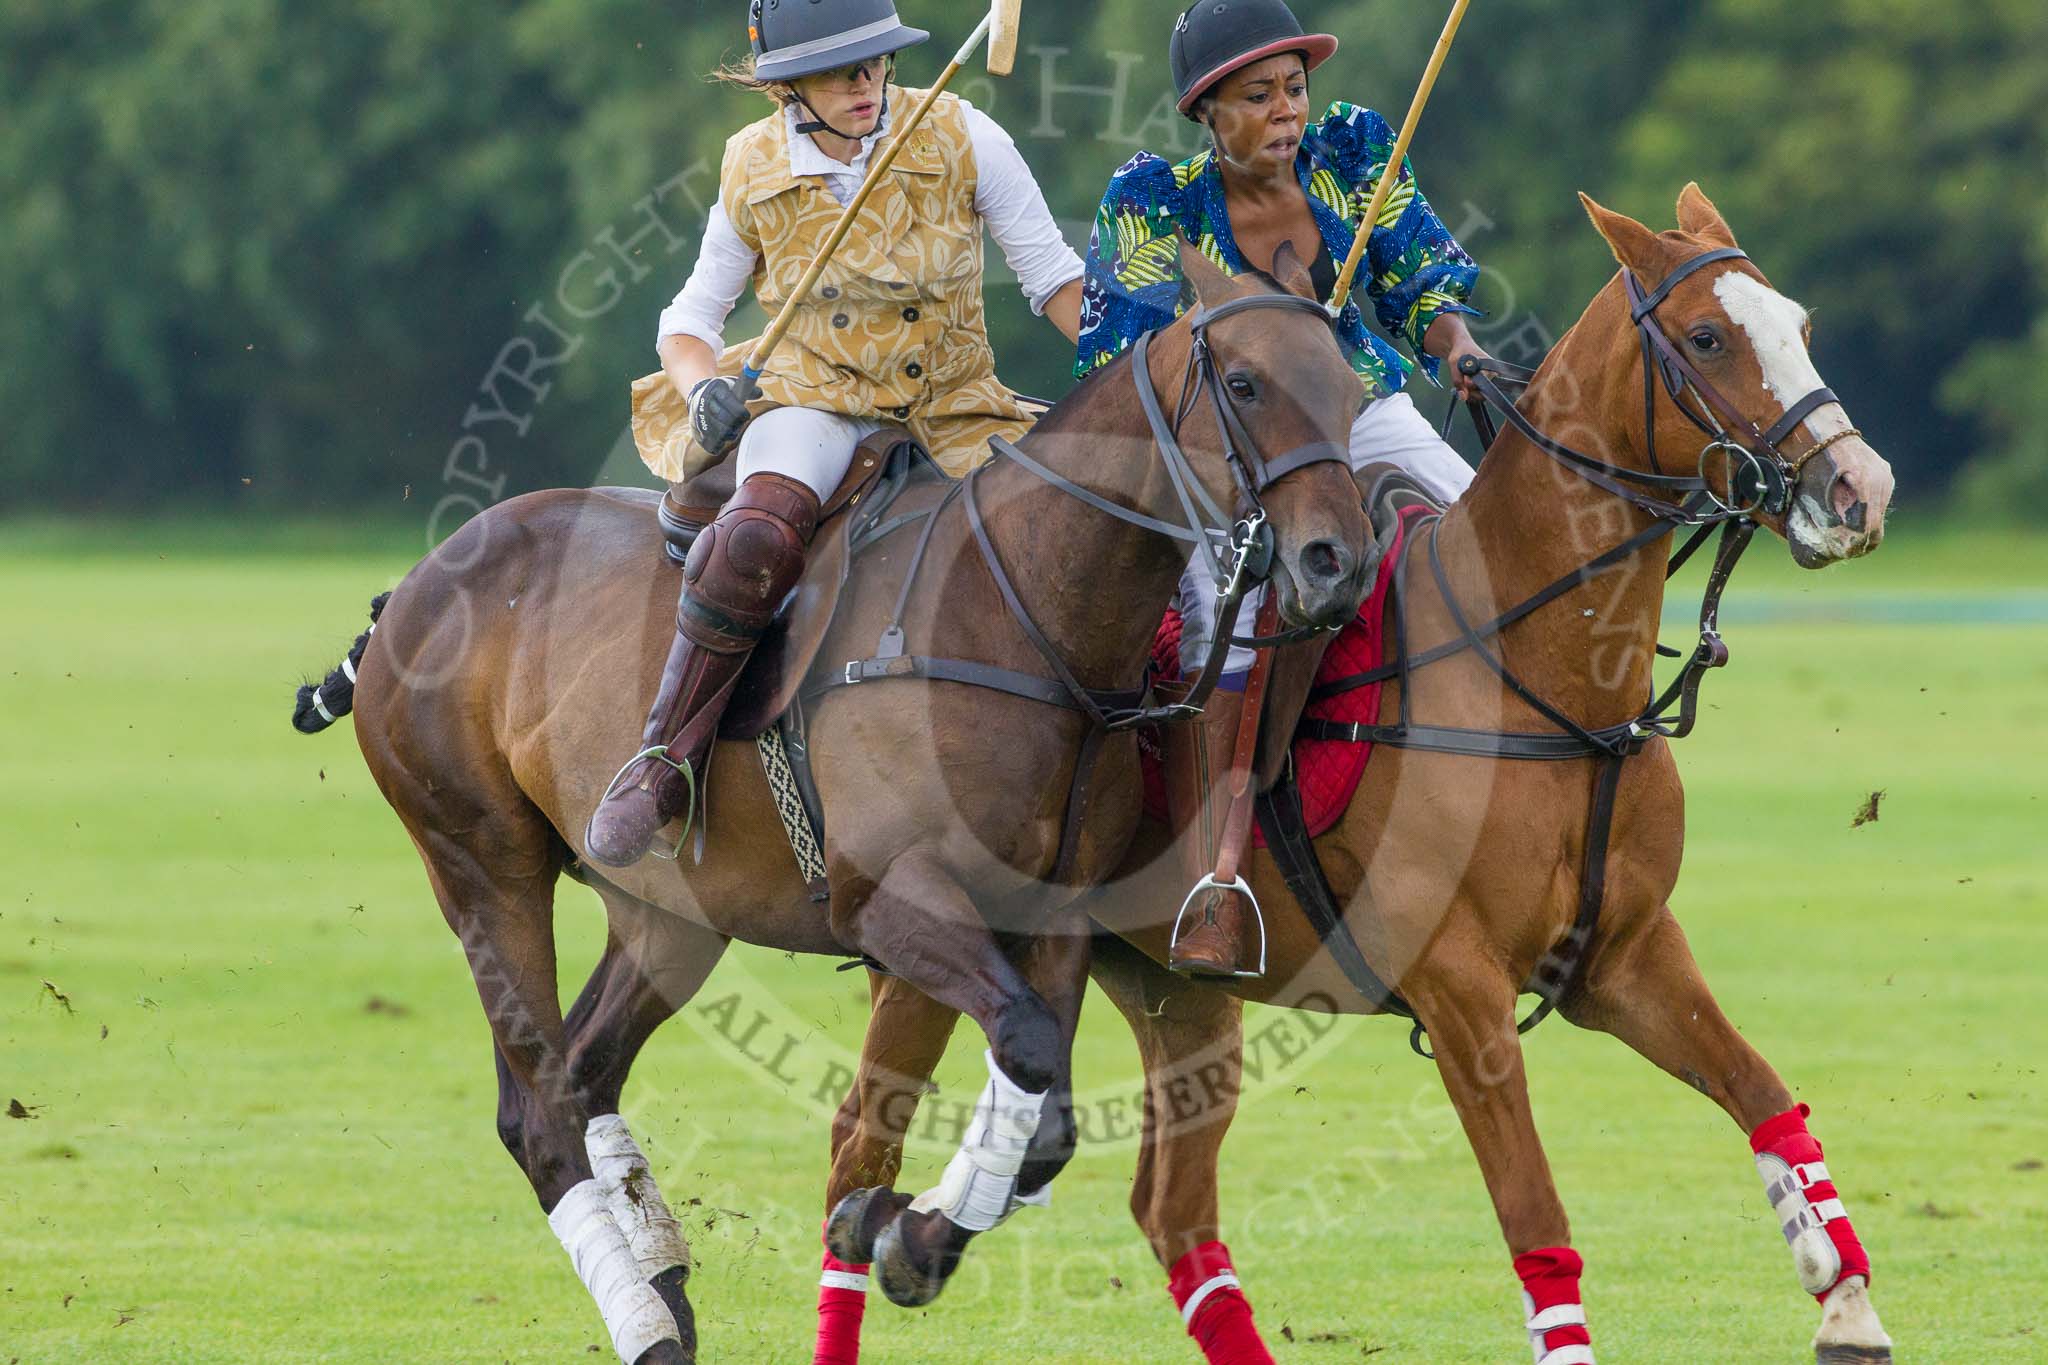 7th Heritage Polo Cup semi-finals: Emma Boers of the Amazons of Polo taking the man...Uneku Atawodi from Nigeria..
Hurtwood Park Polo Club,
Ewhurst Green,
Surrey,
United Kingdom,
on 04 August 2012 at 14:10, image #203